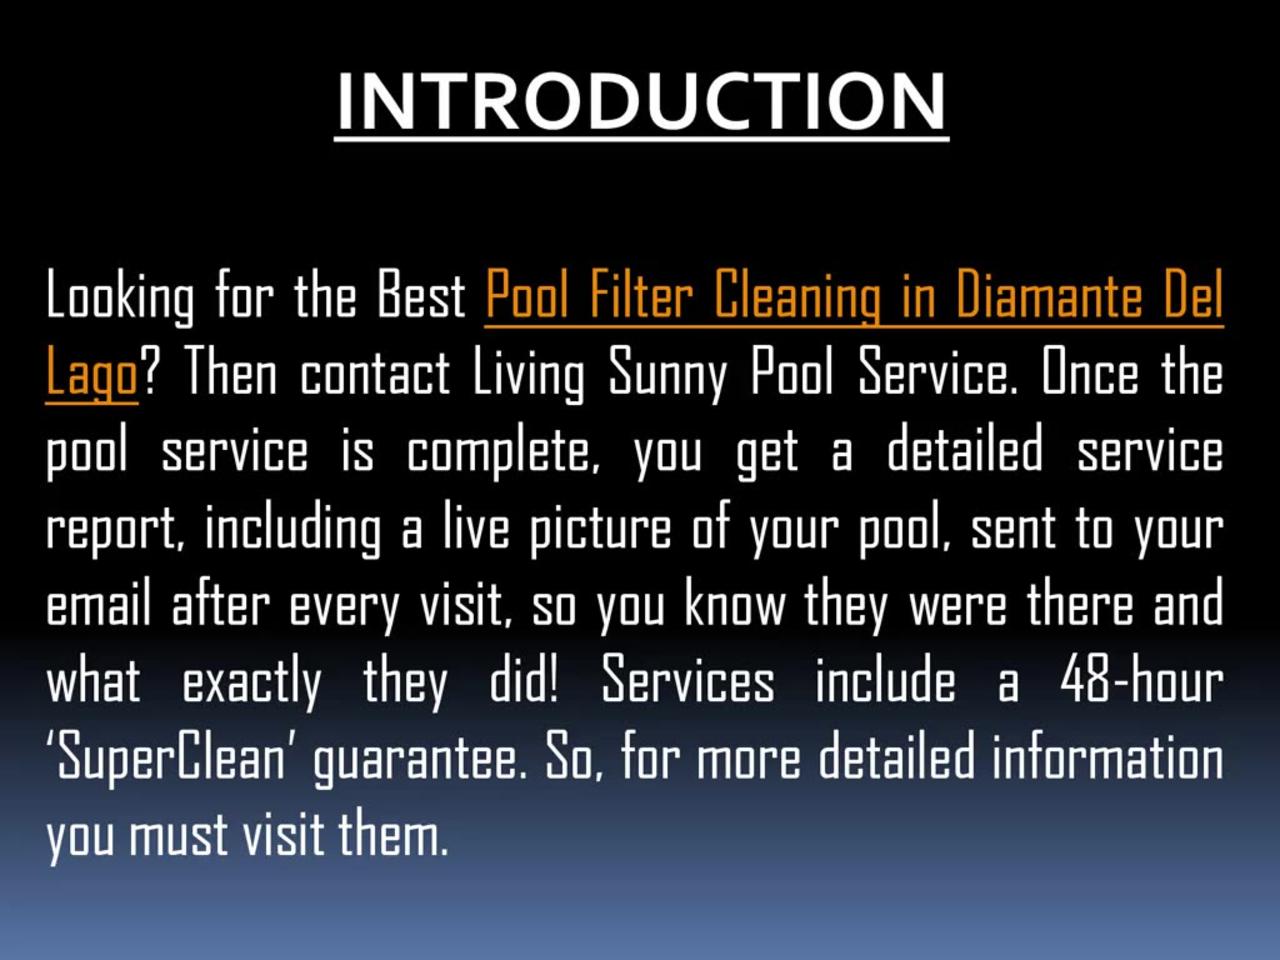 The Best Pool Filter Cleaning in Diamante Del Lago